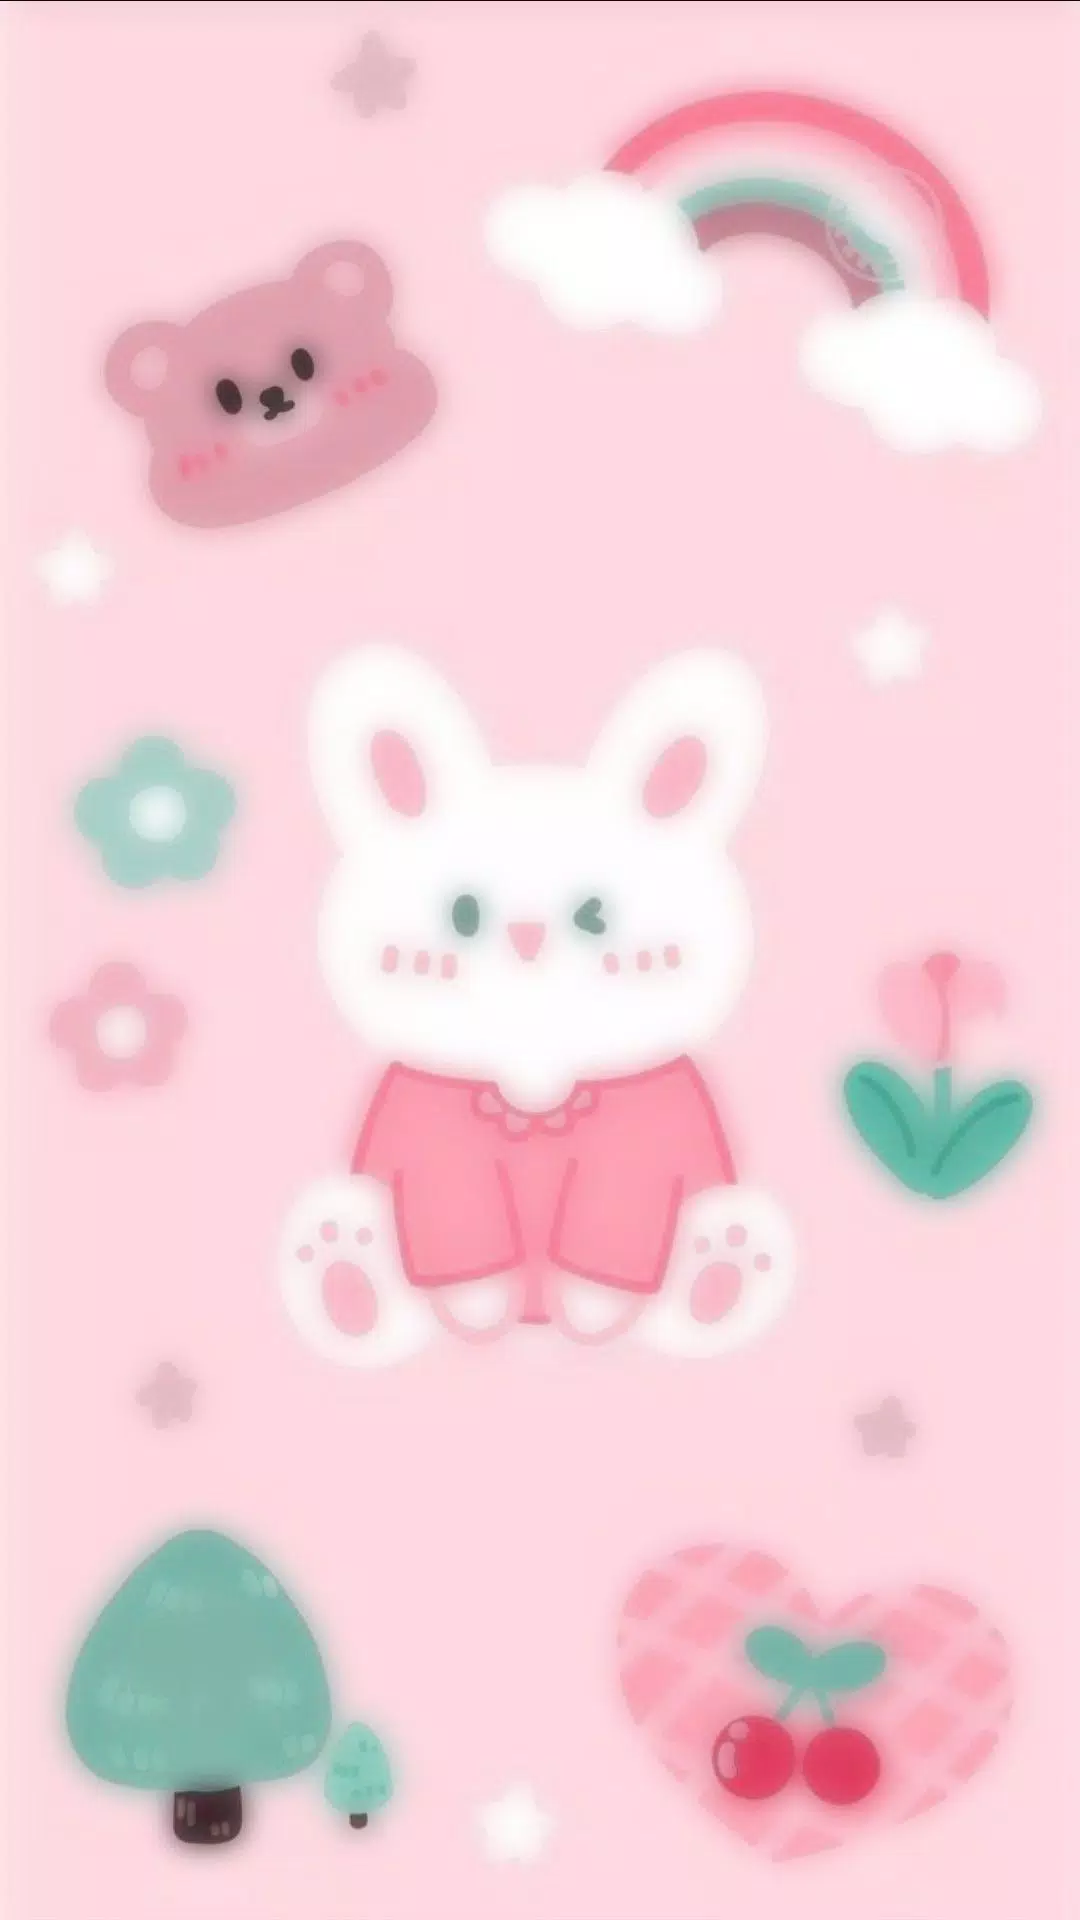 Pink background with a white rabbit, a bear, a rainbow, and other items. - Kawaii